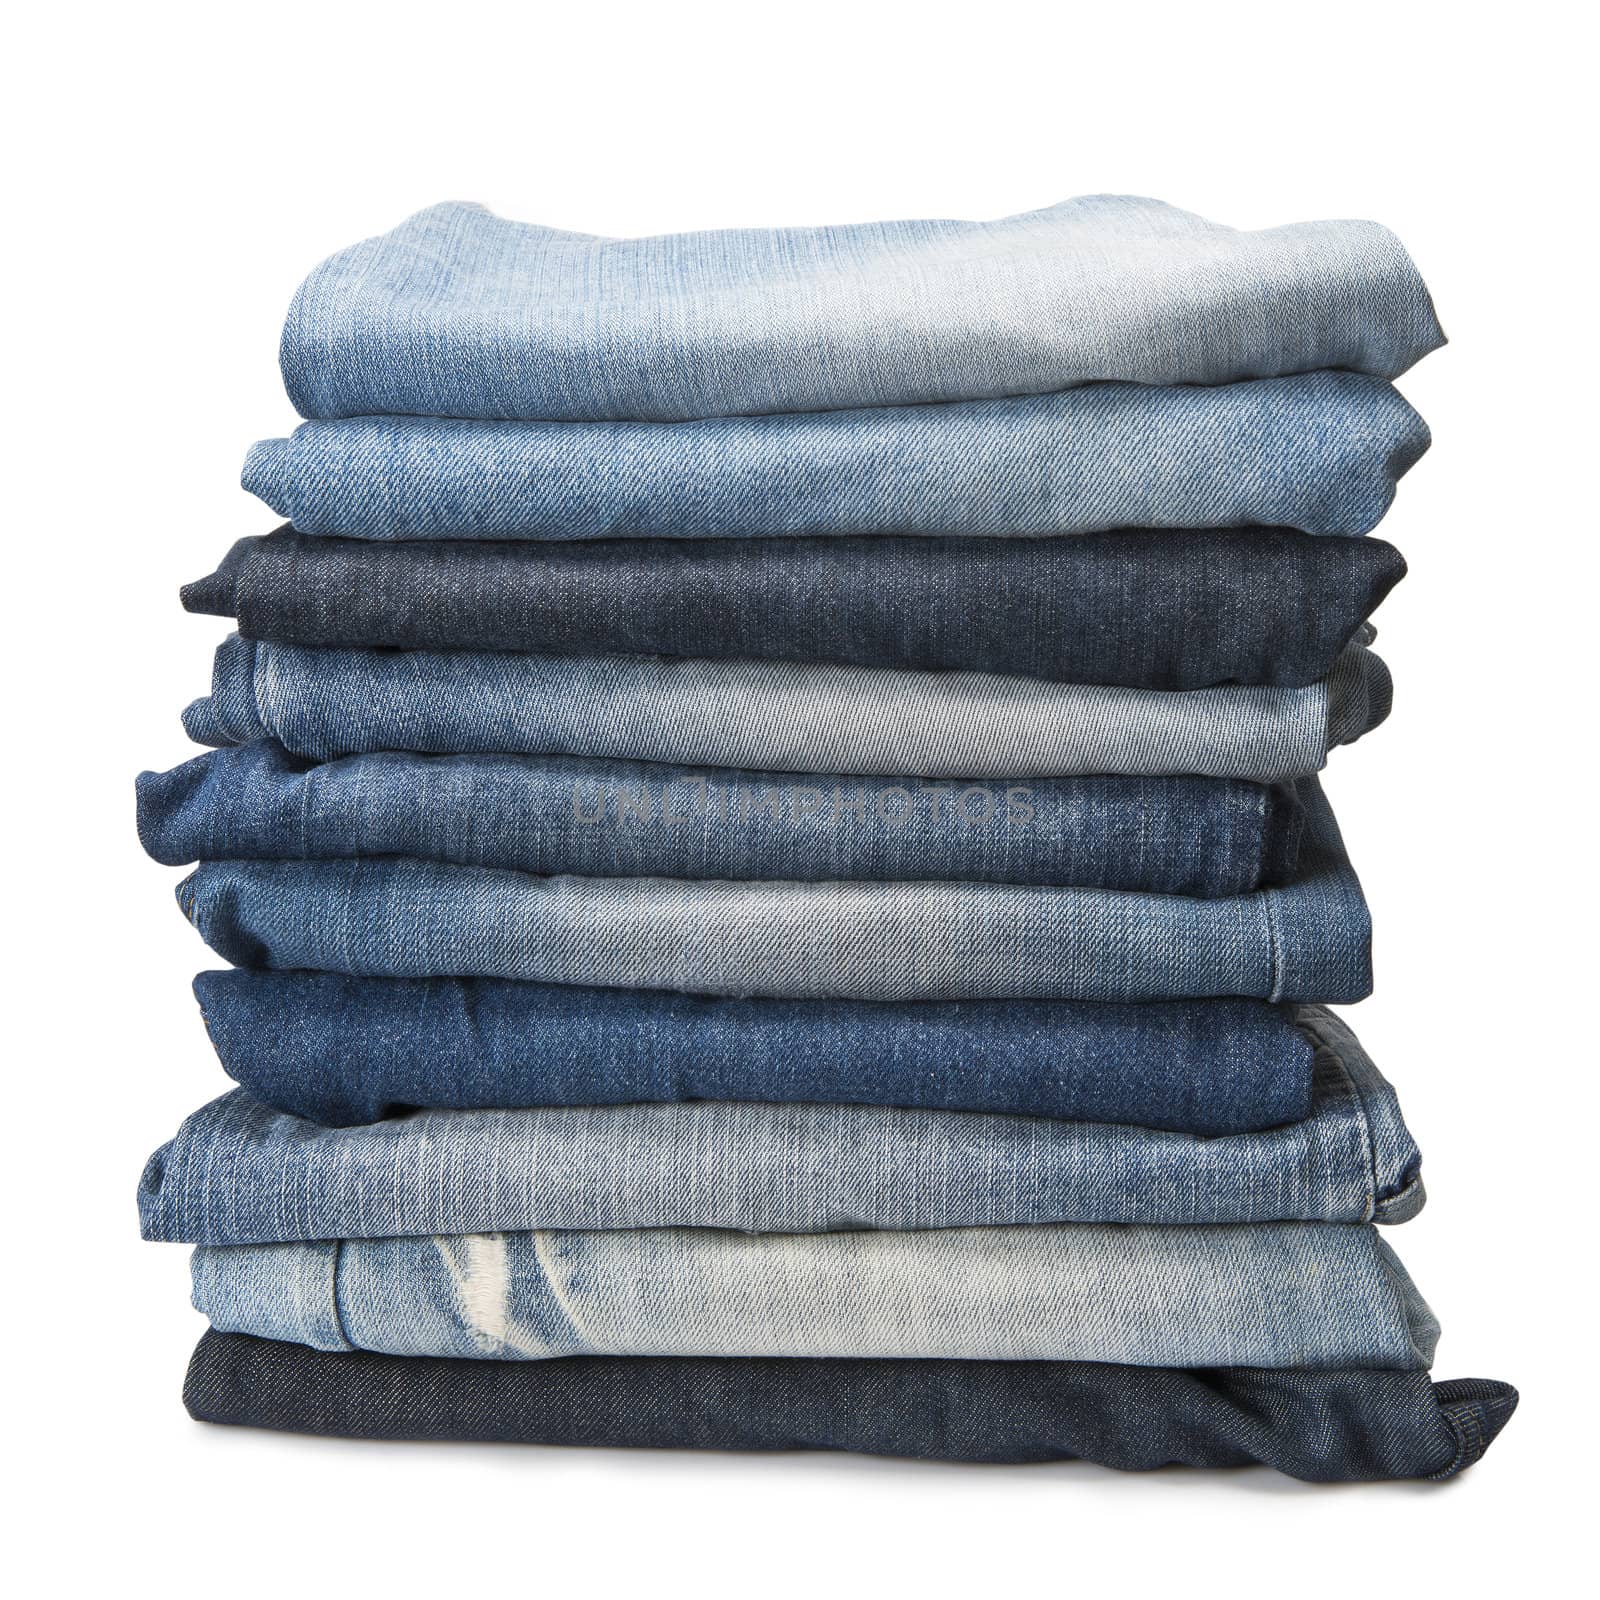 Stack of old and worn blue jeans over a white background